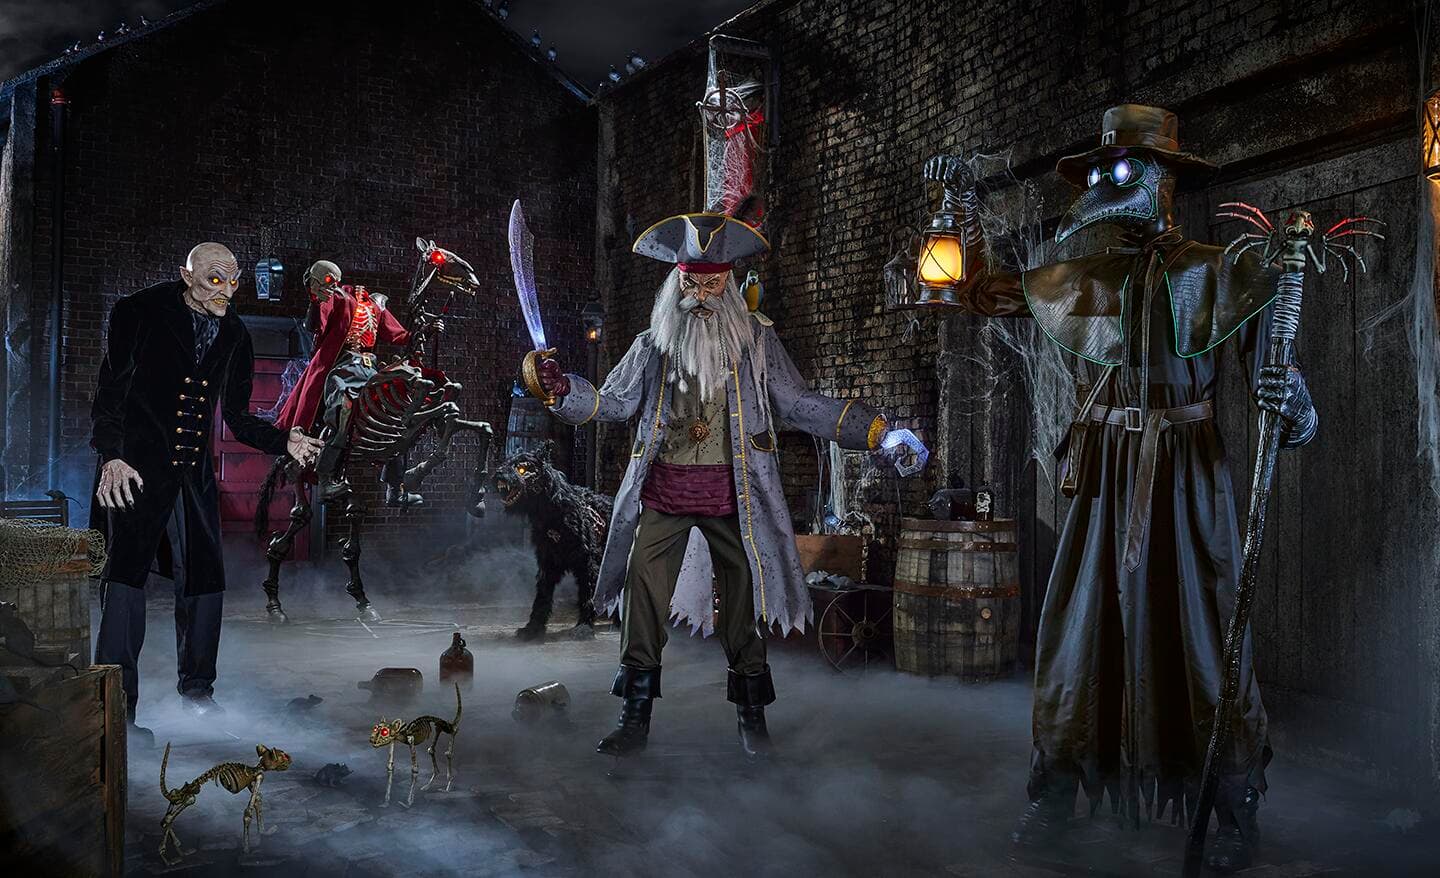 A plague doctor figure with glowing eyes mingles with a pirate and other creatures in a yard decorated for Halloween.